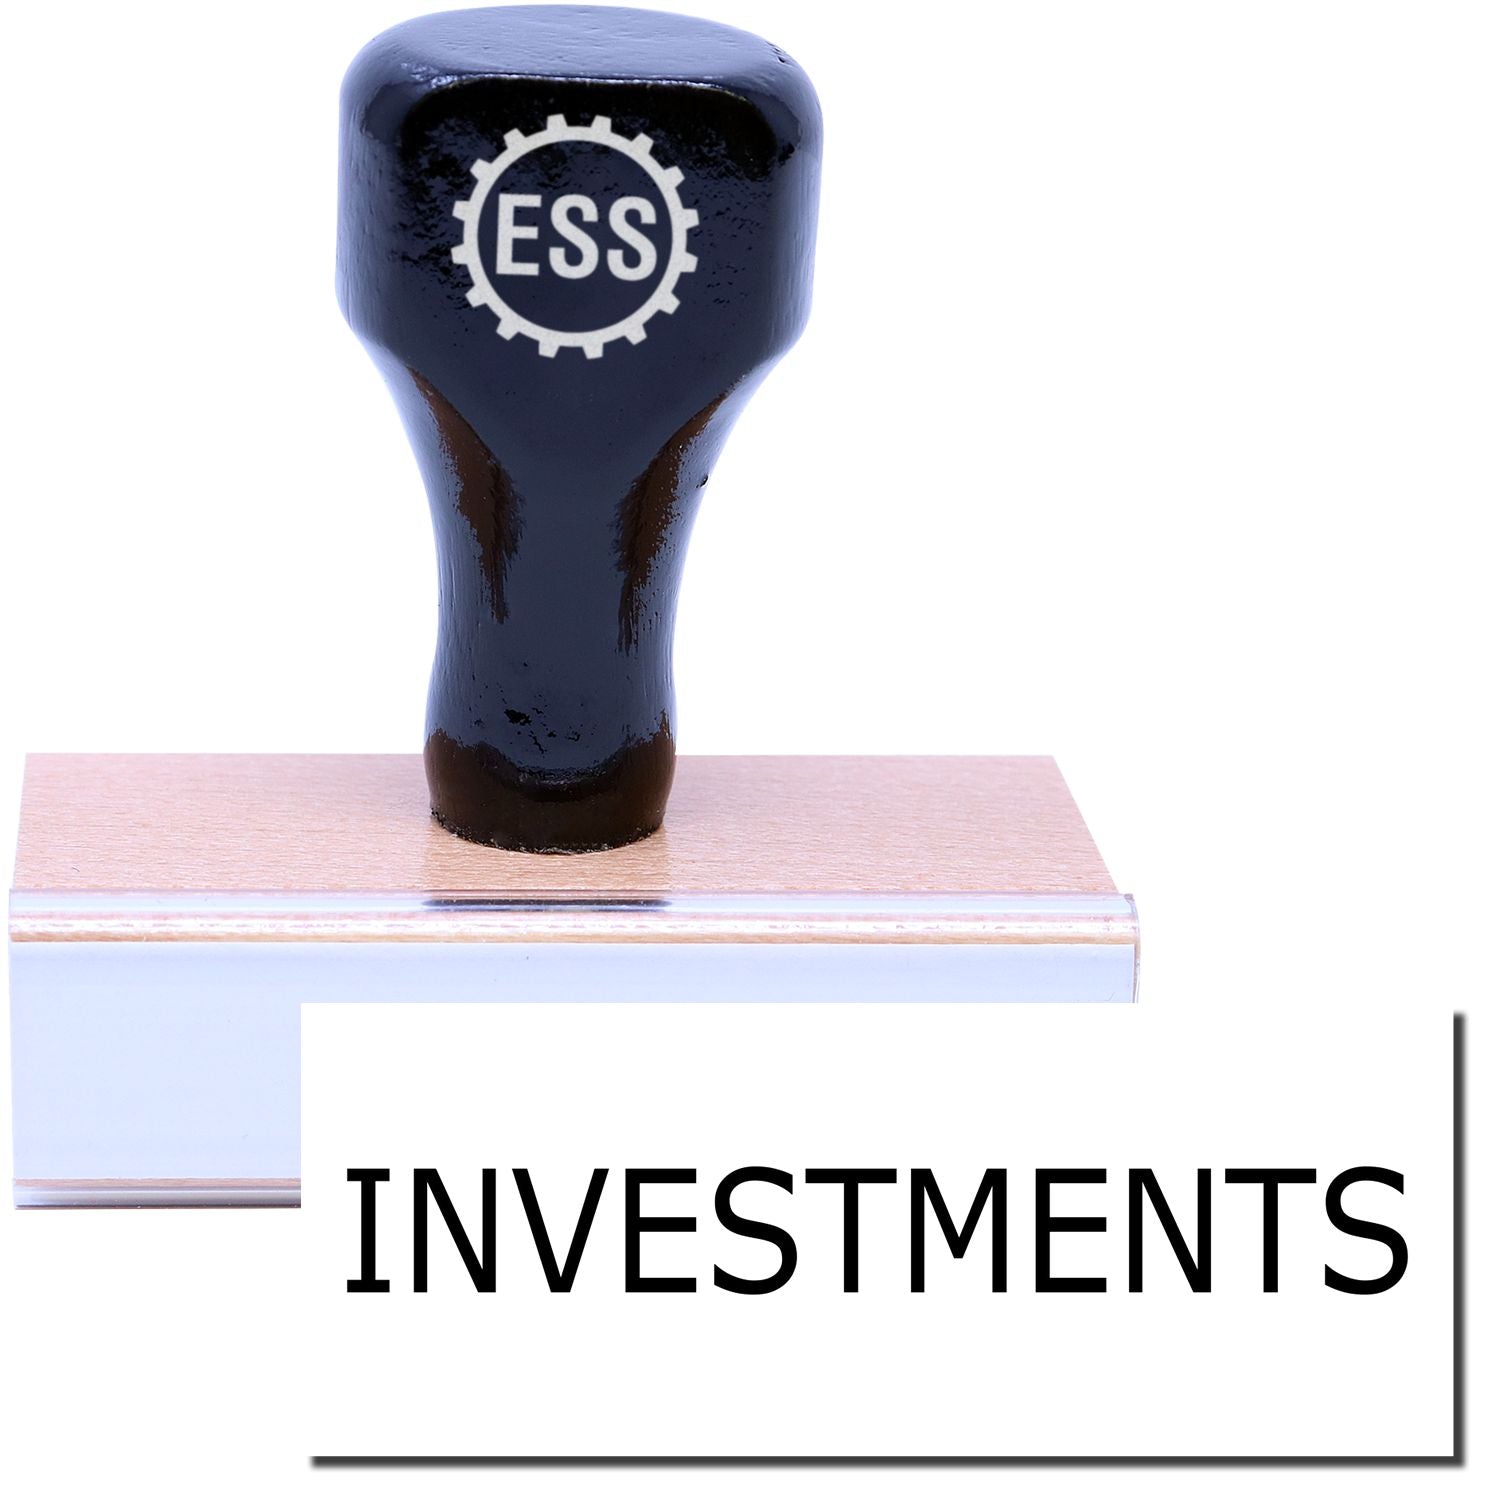 A stock office rubber stamp with a stamped image showing how the text "INVESTMENTS" in a large font is displayed after stamping.